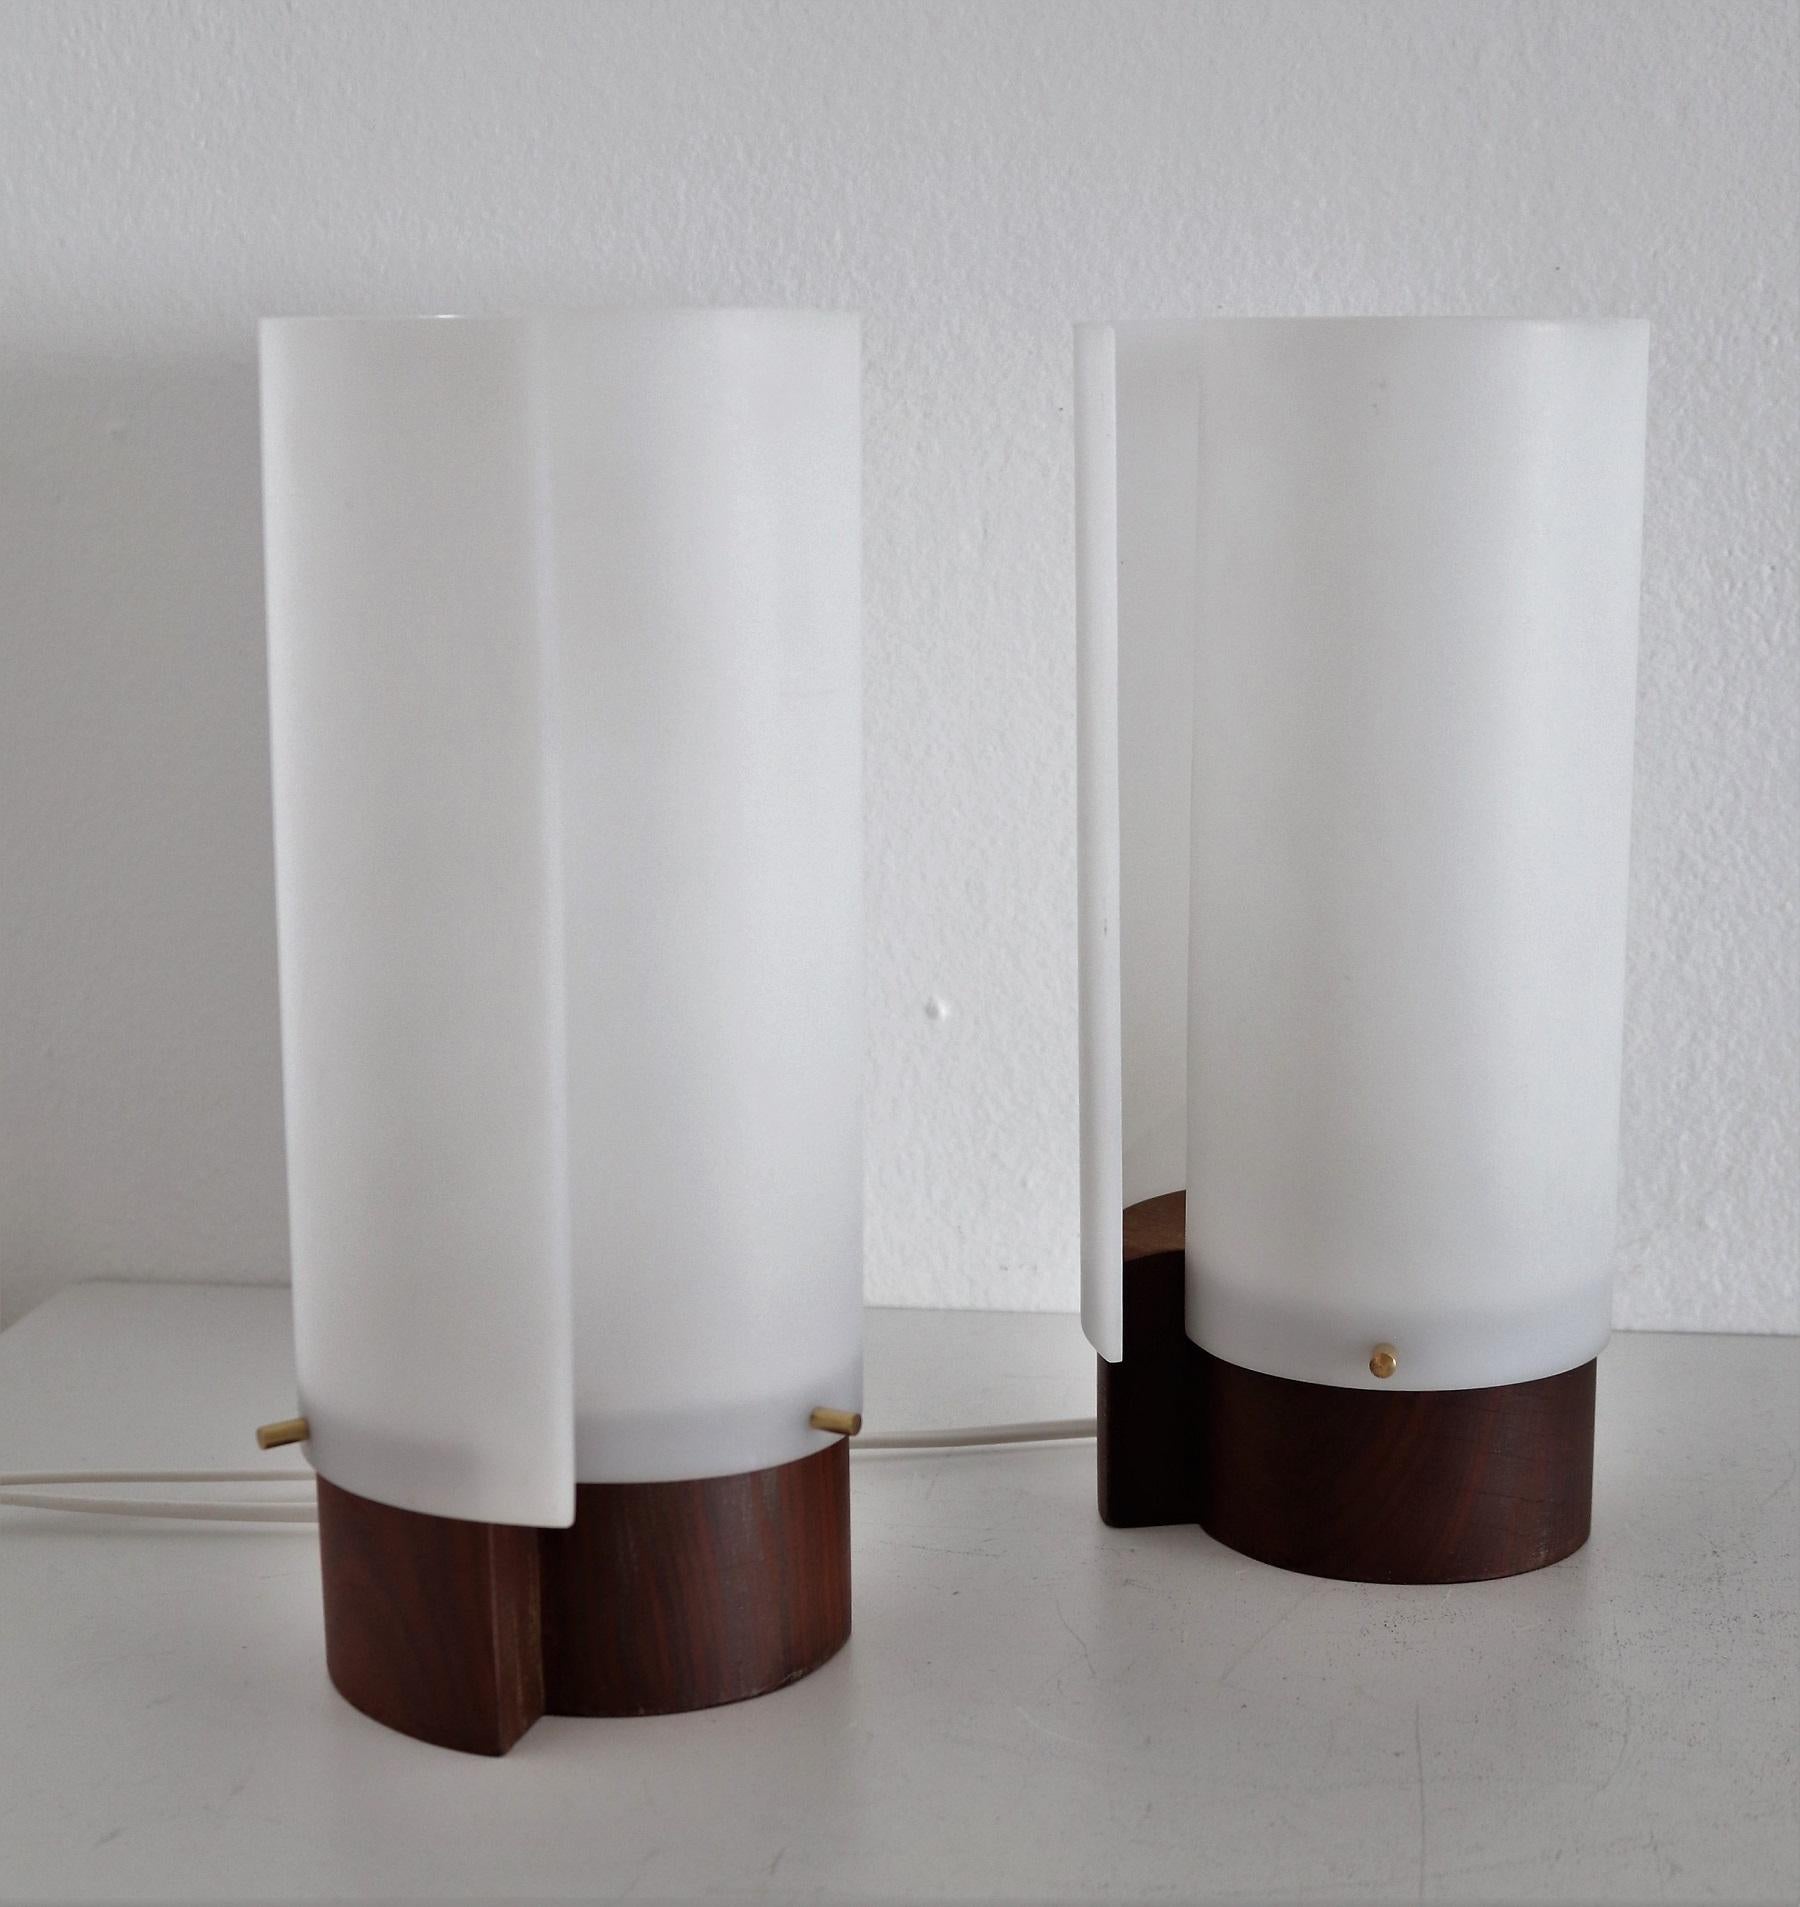 Italian Modernist Teakwood Table Lamps with Methacrylic Curved Shades, 1950s For Sale 2